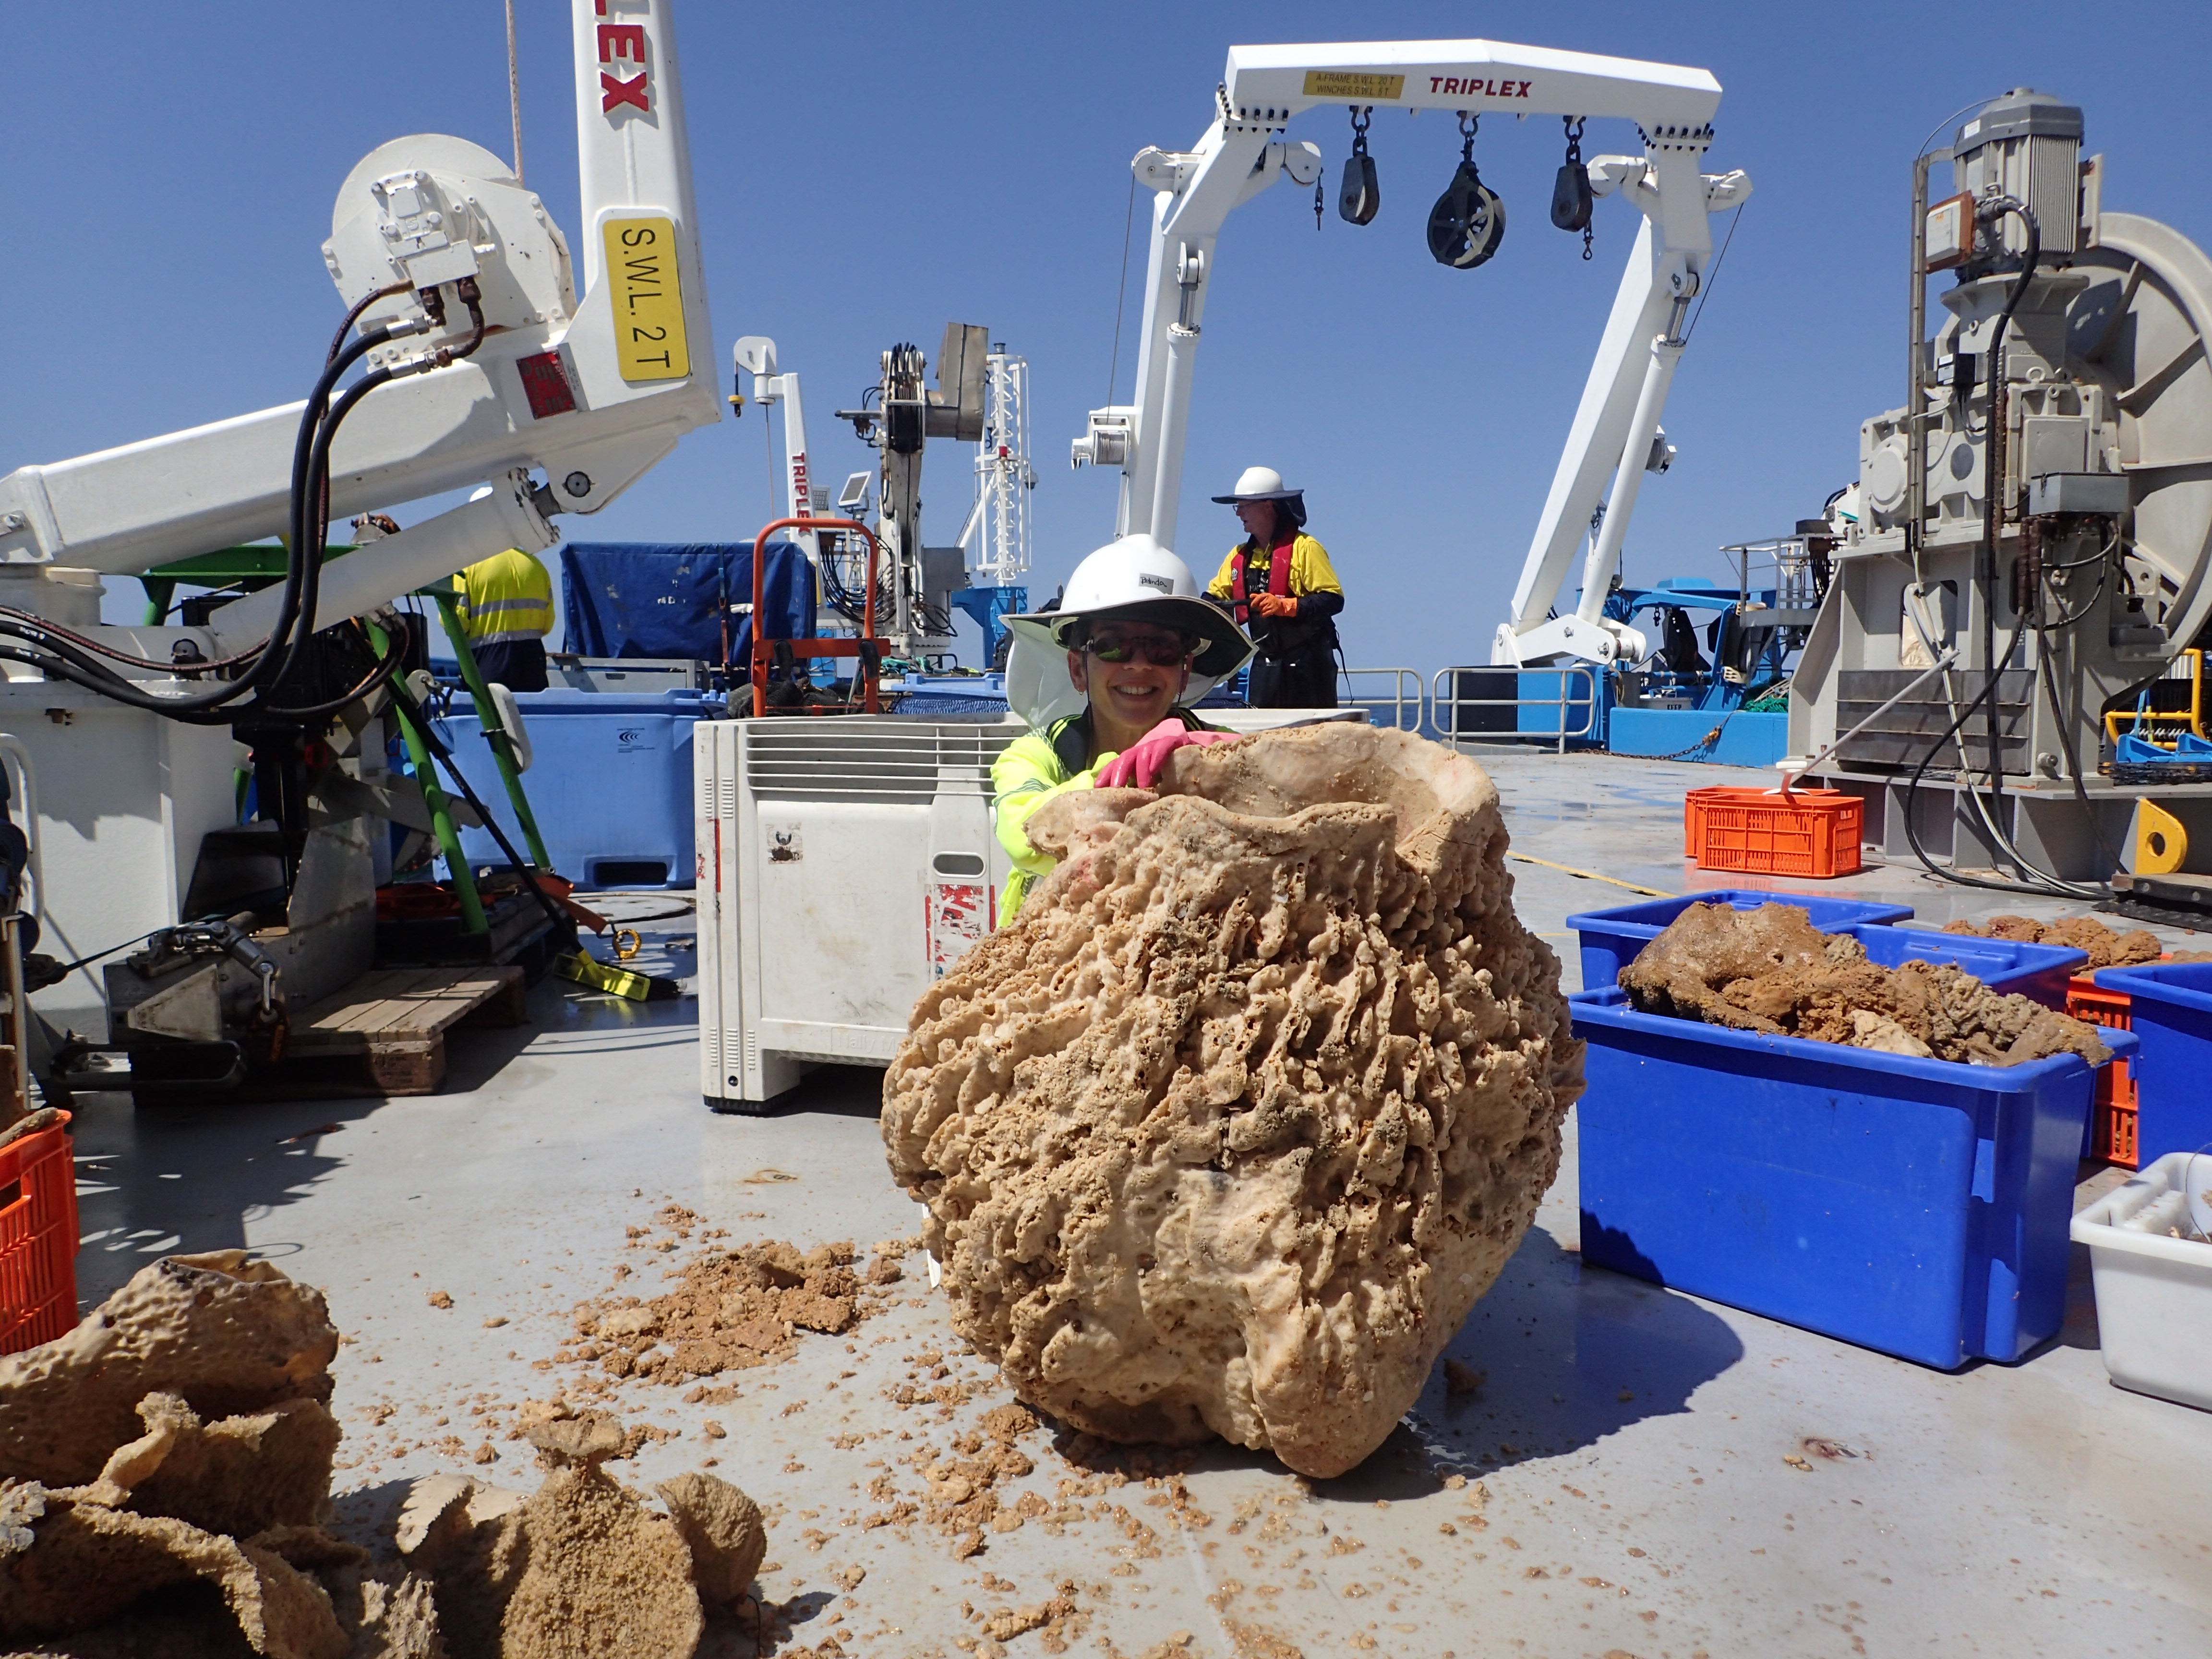 3 Cup sponge weighing 50 kg collected off WA North West Shelf CSIRO Tracee Nguyen